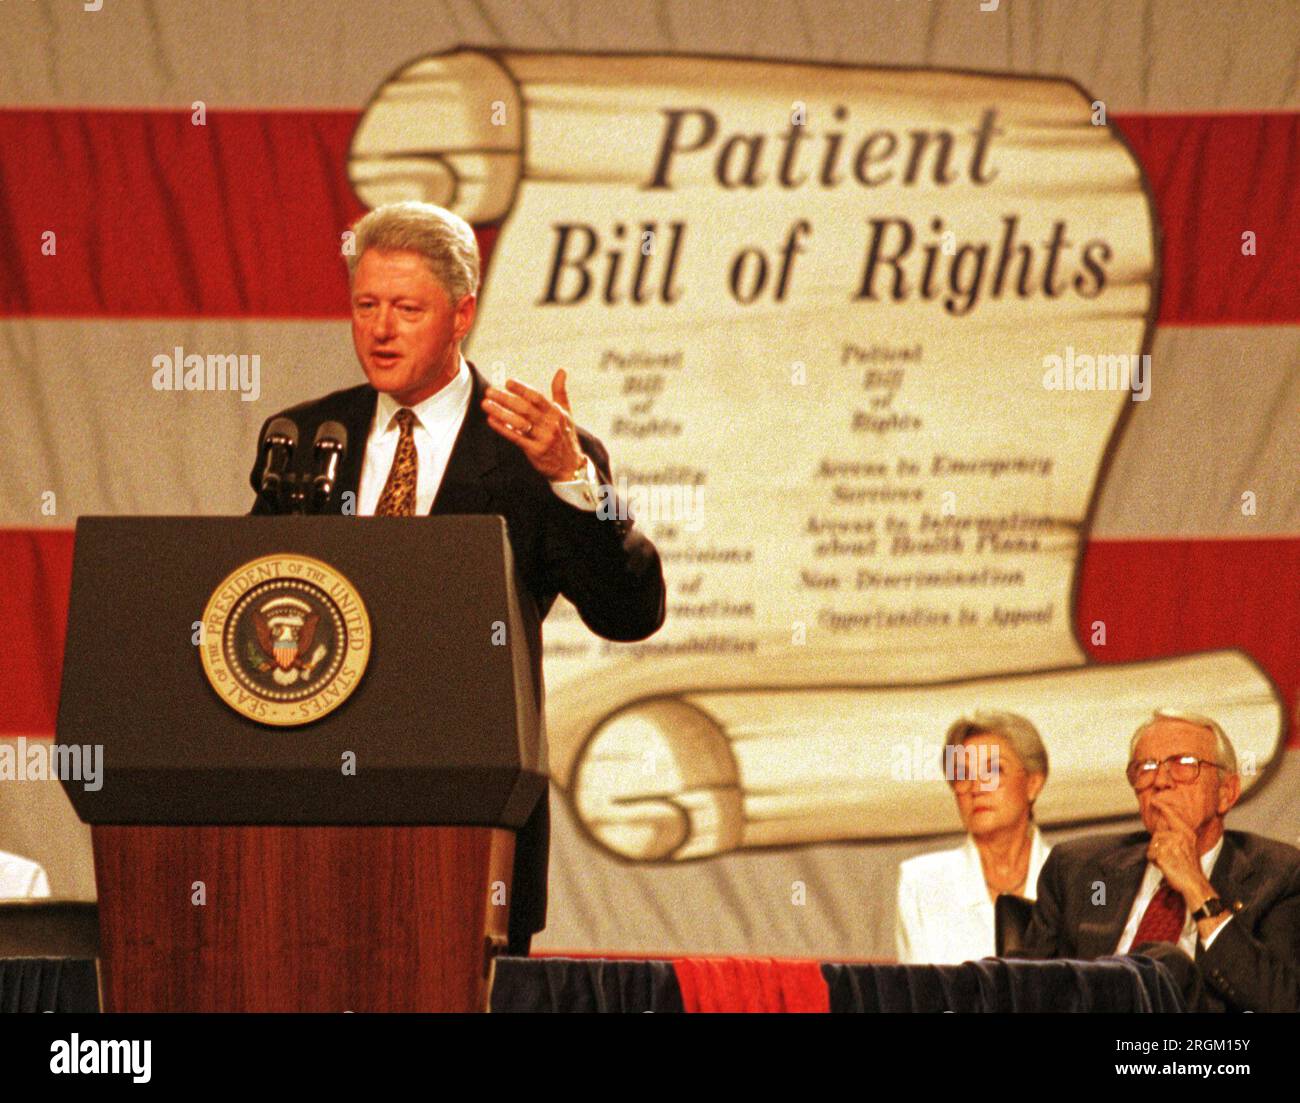 President Bill Clinton (left) promotes his proposed 'patients' bill of rights' legislation as retiring Kentucky Sen. Wendell H. Ford (right) and an unidentified woman look on during a visit to Kentucky on Monday, Aug. 10, 1998 at the Commonwealth Convention Center in Louisville, Jefferson County, KY, USA. Clinton attended a fundraiser luncheon for Democratic congressional candidate Scotty Baesler later in the day. (Apex MediaWire Photo by Billy Suratt) Stock Photo